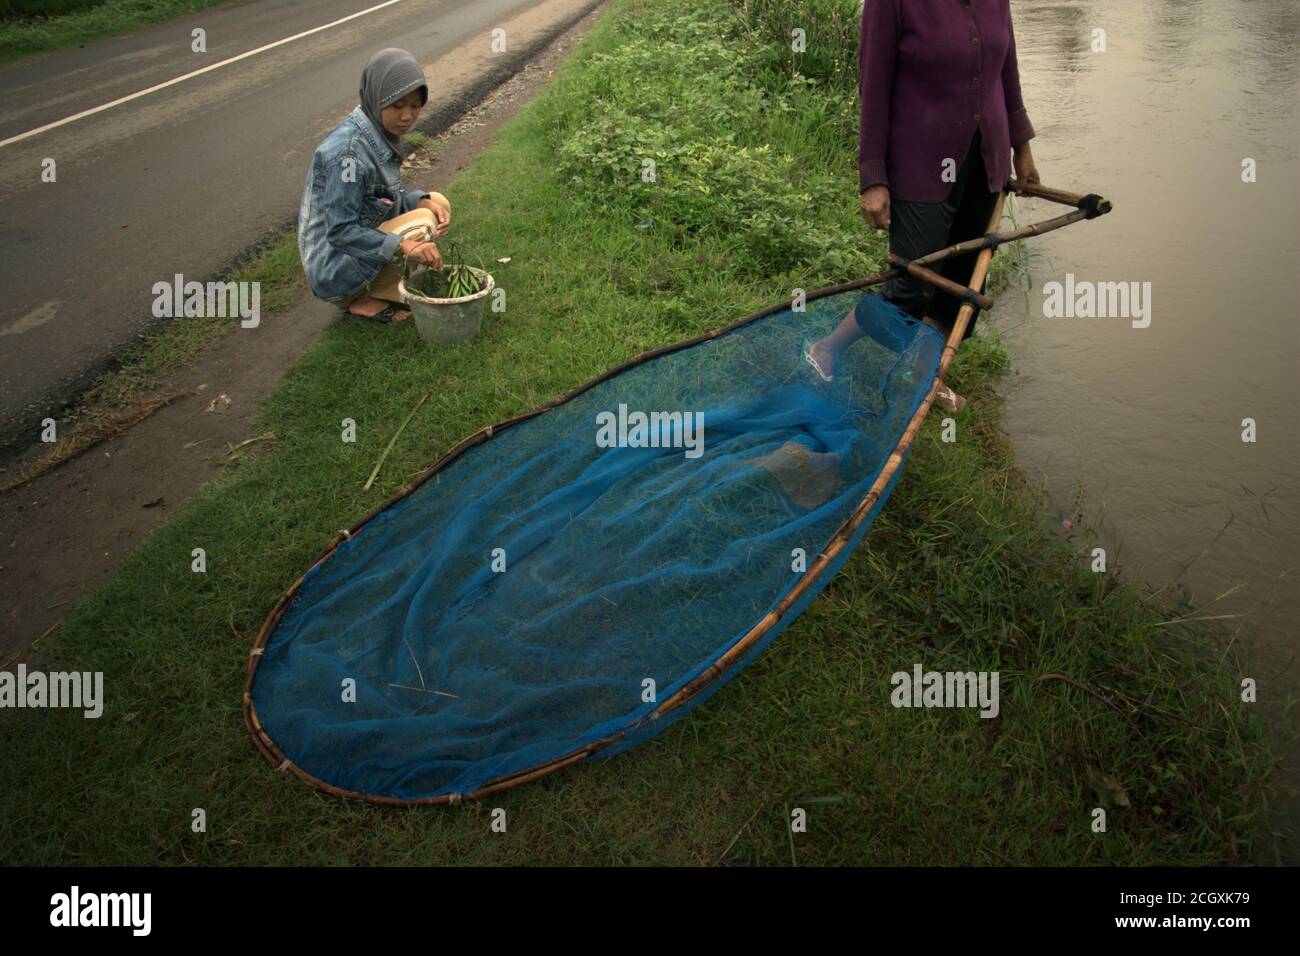 A woman holding a pushnet, prepare to fish as she stands on the bank of an irrigation canal in Karawang regency, West Java province, Indonesia. Stock Photo